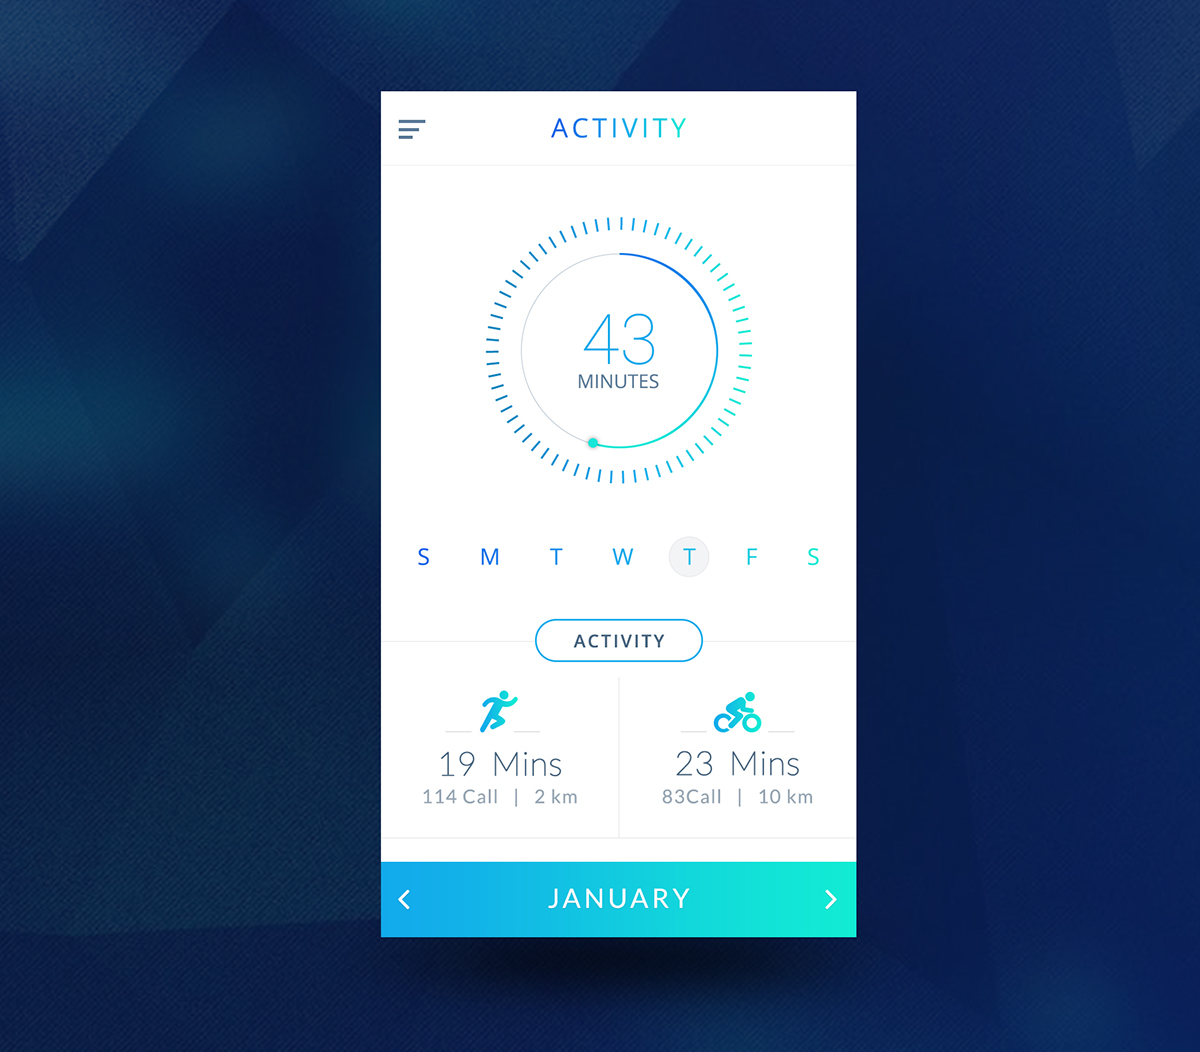 app ui ux mobile invision Prototyping Iphone material interface mobile app fitness run cycle activity running Health Cycling gym